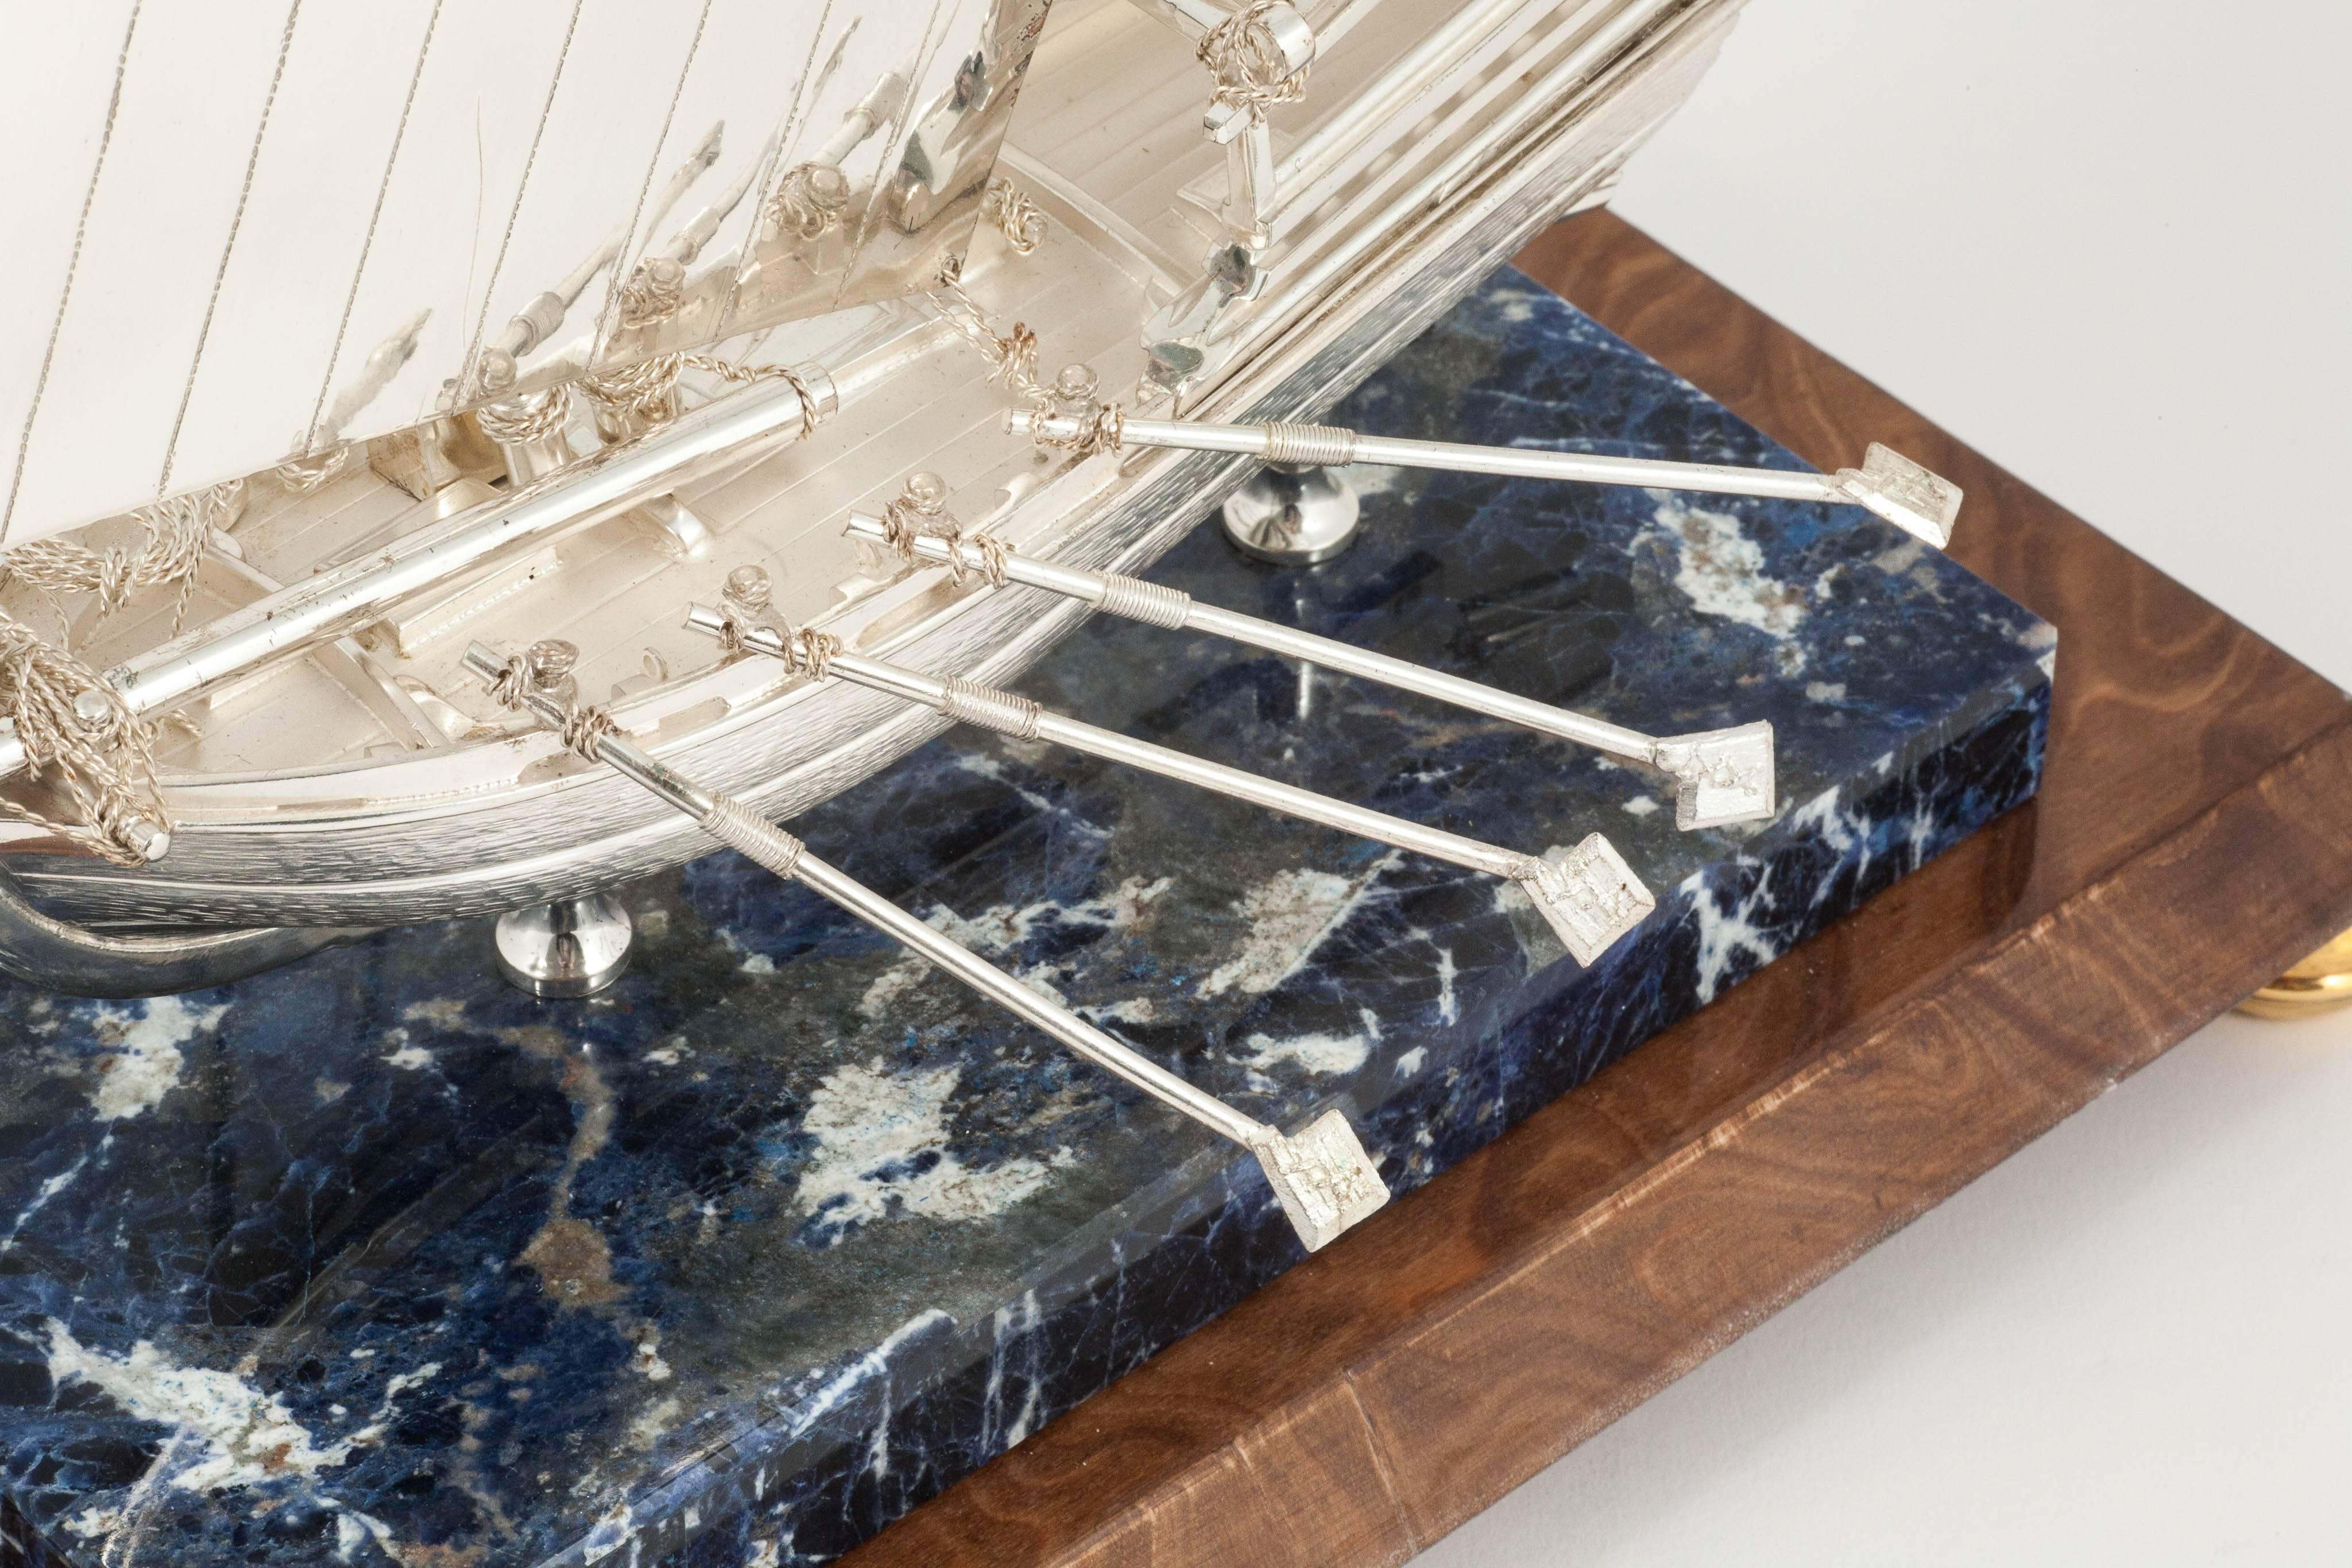 This scale silver model of a dhow is finely handmade with realistic rigging and deck detail. It is made of substantial heavy gauge silver with cast sections and four oars on each side. The stern of this yacht carries an enameled flag of the United